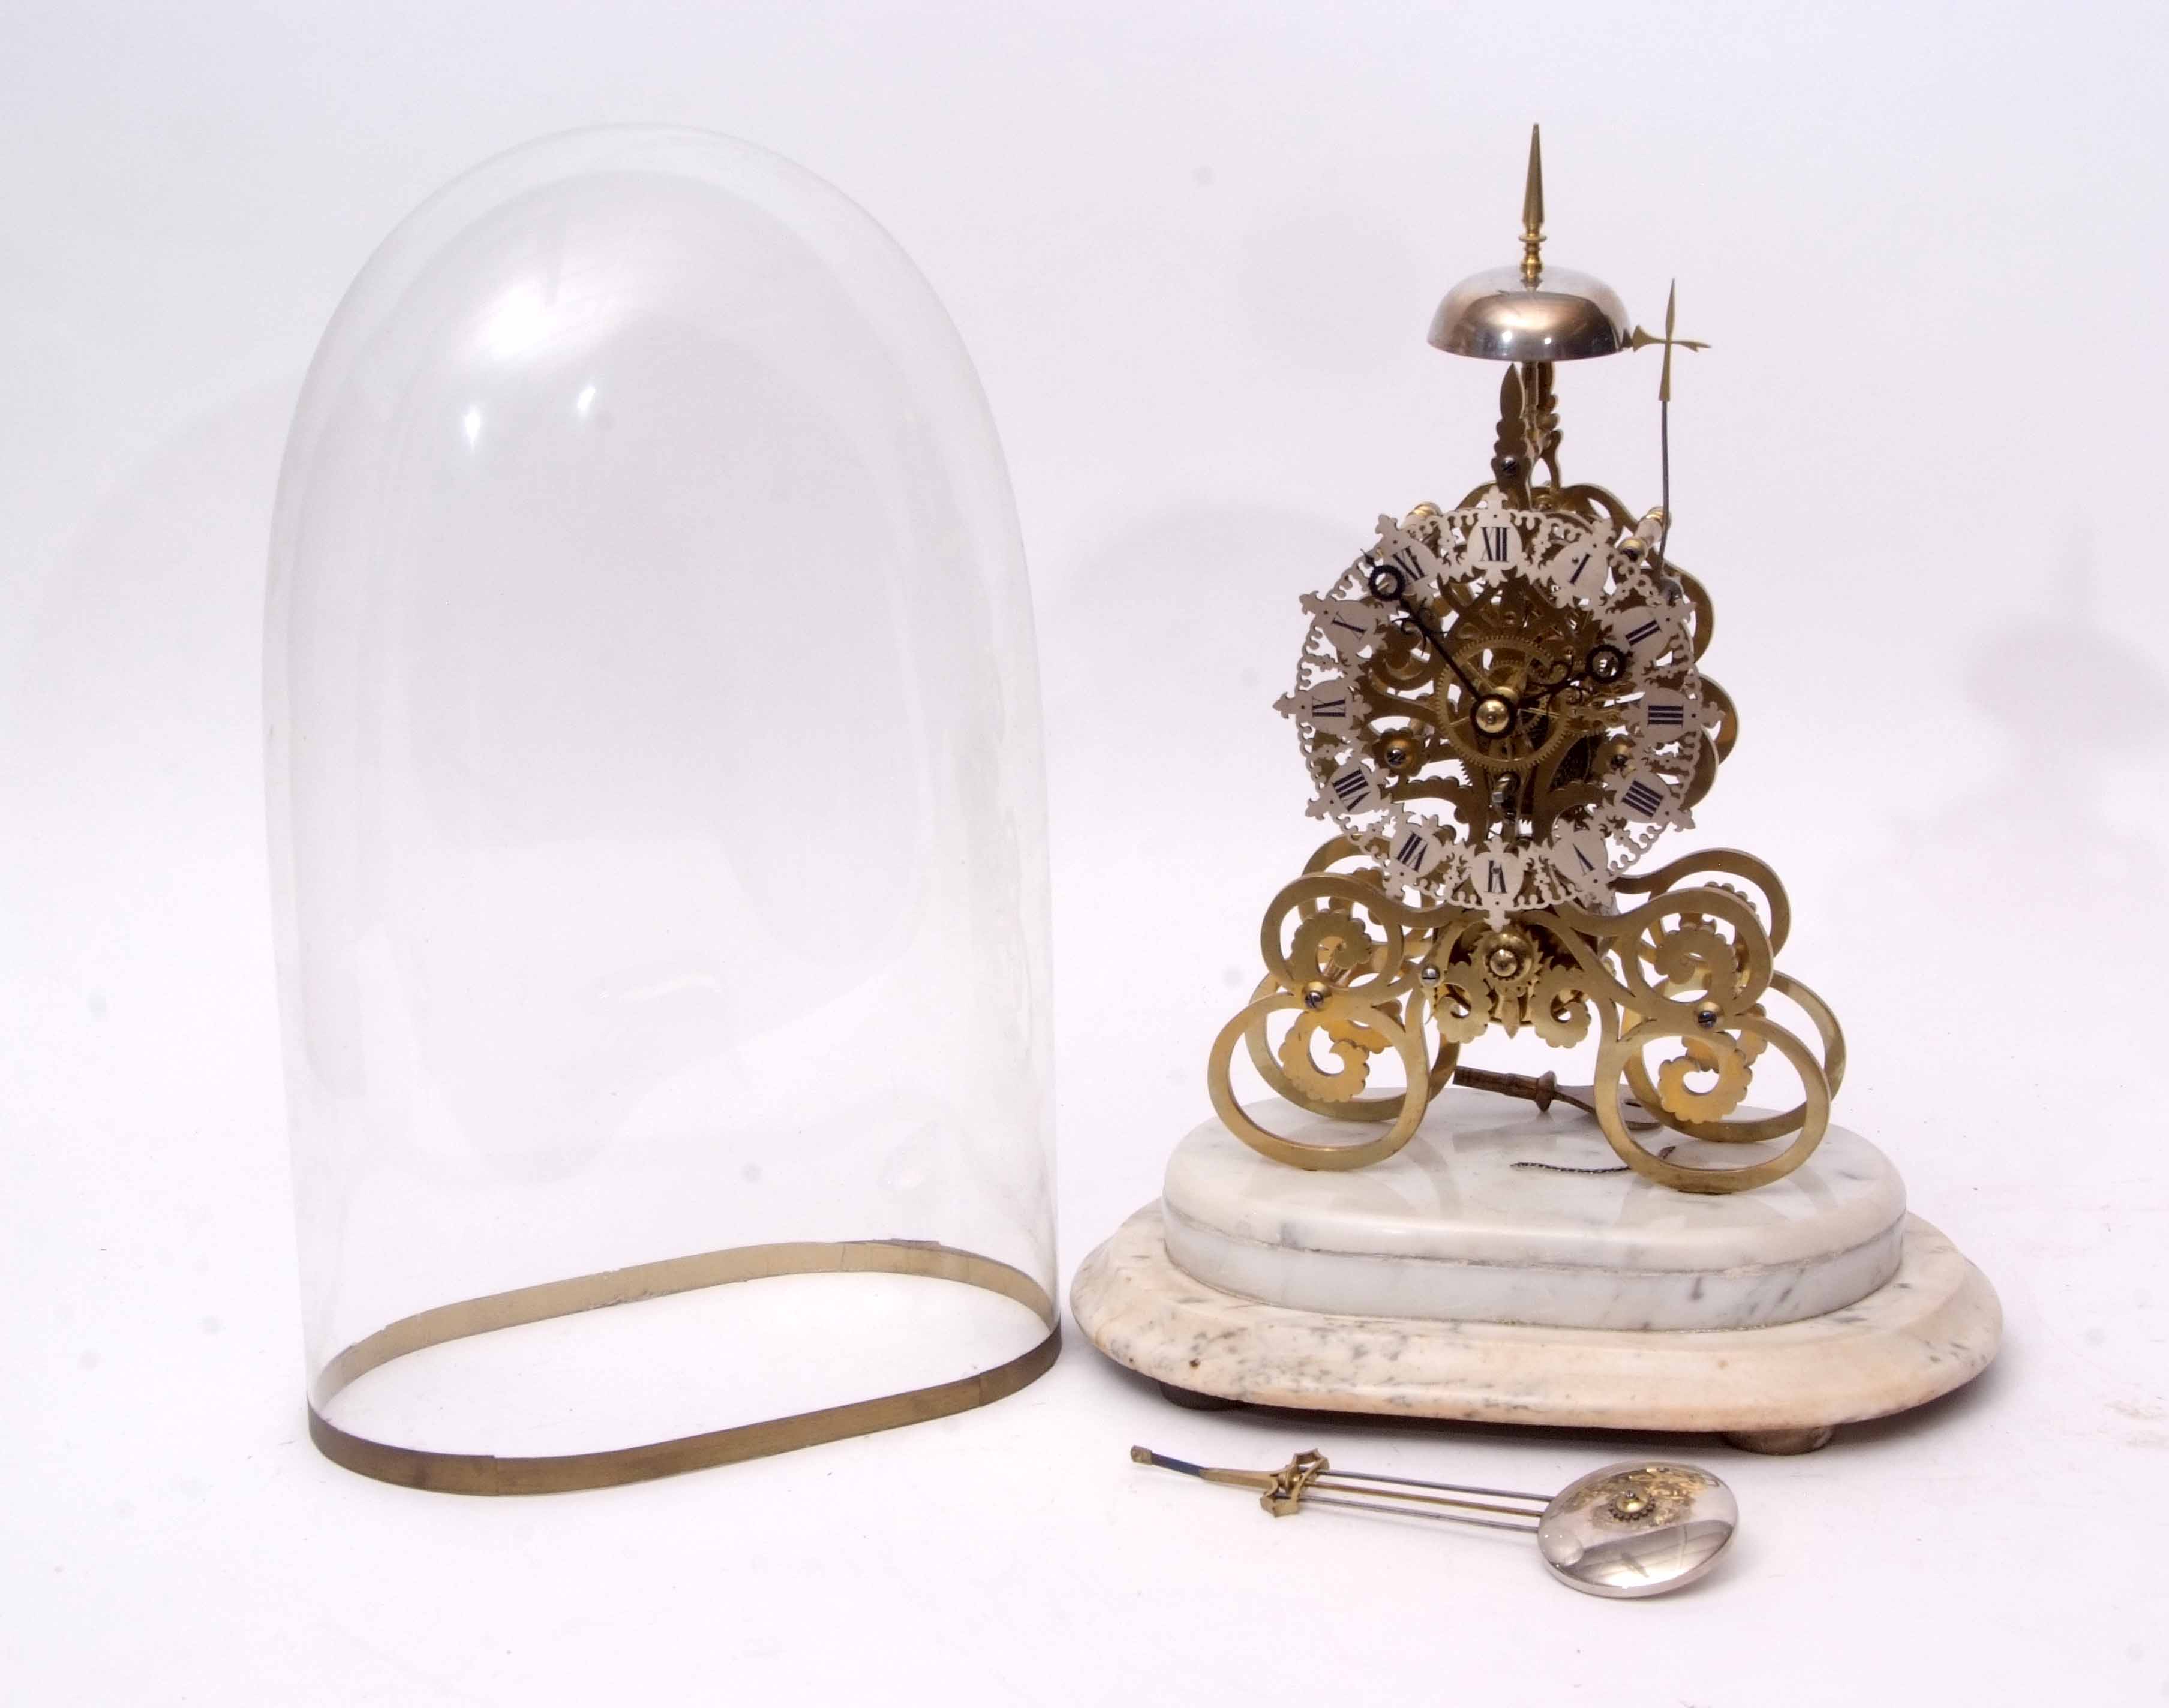 Late 19th century single chain fusee skeleton clock, the whole raised on a variegated white marble - Image 2 of 3